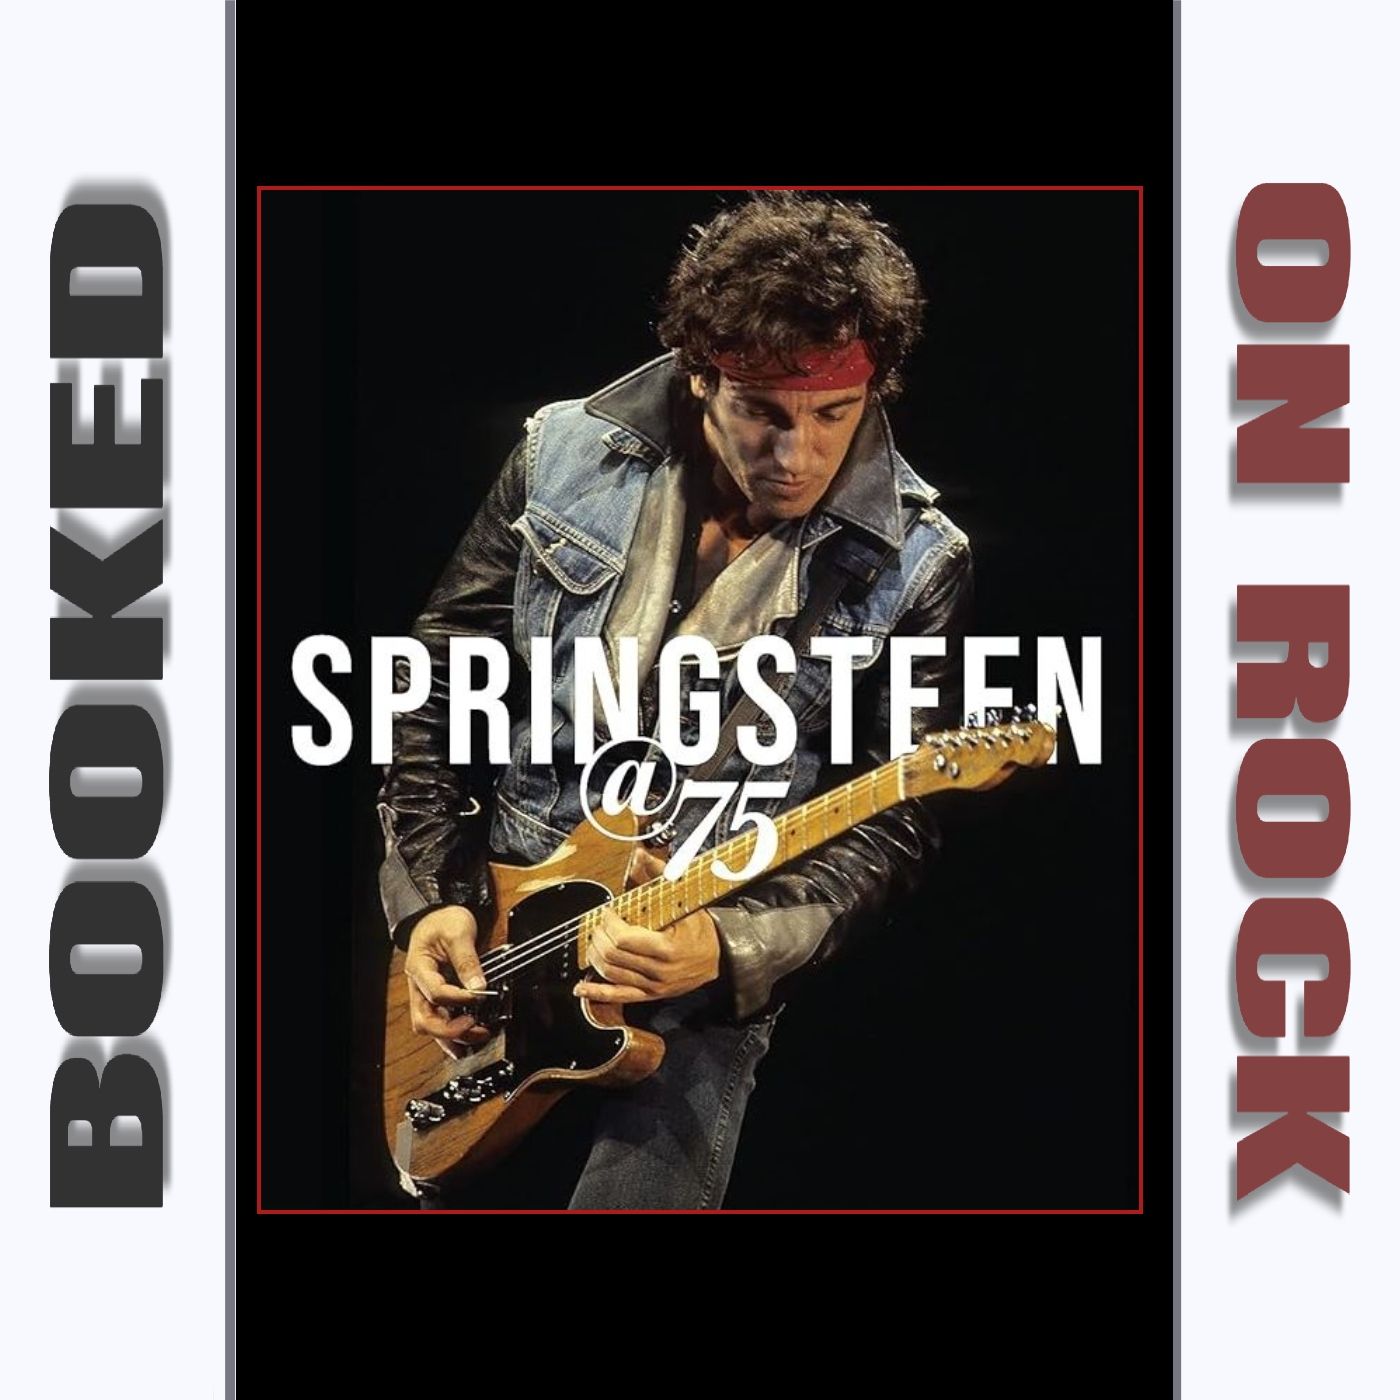 Bruce Springsteen: Still ”The Boss” After All These Years! [Episode 186]